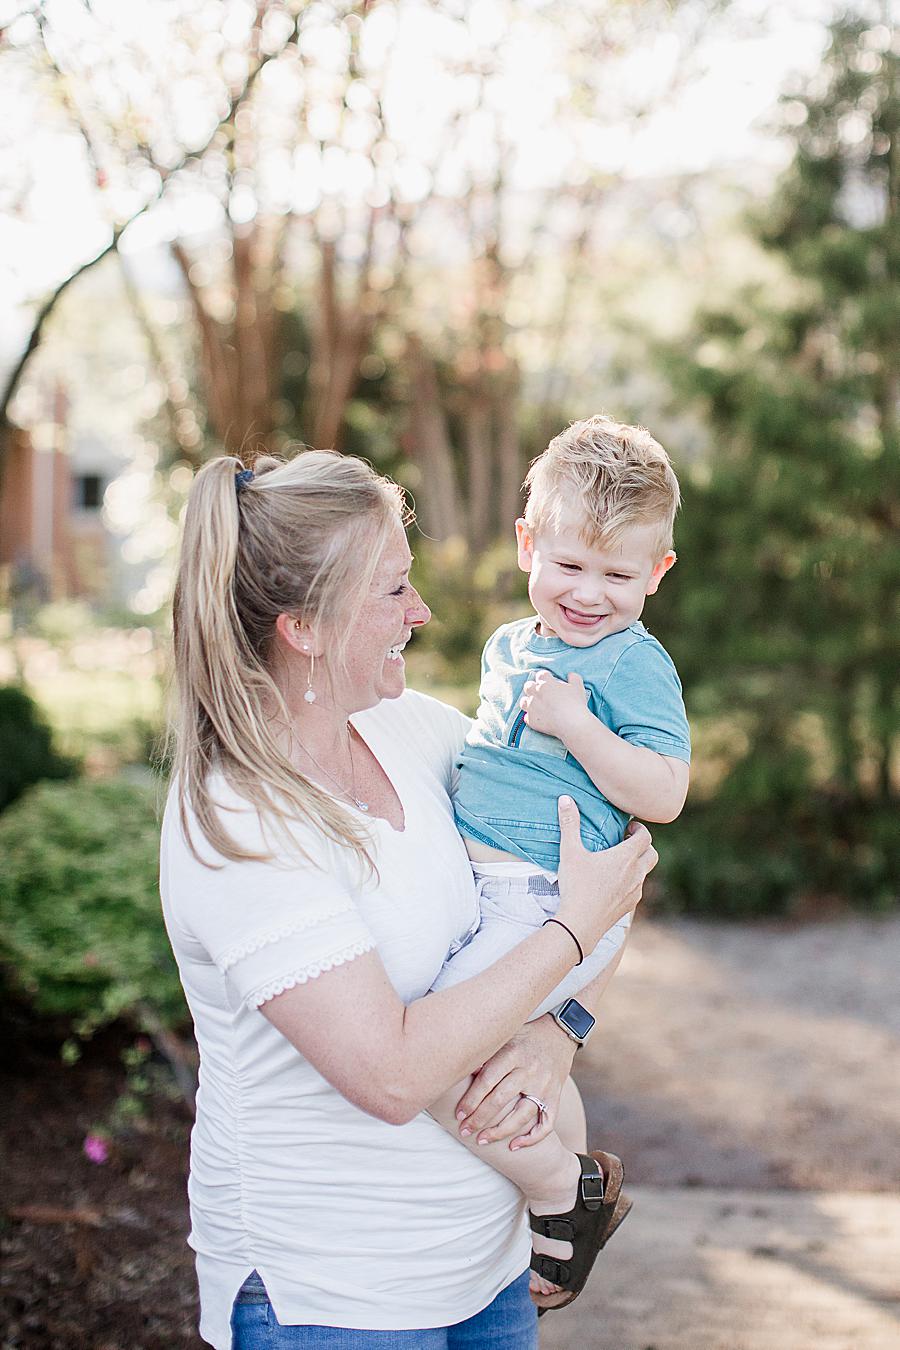 Blue shirt at this Mommy & Me Session by Knoxville Wedding Photographer, Amanda May Photos.